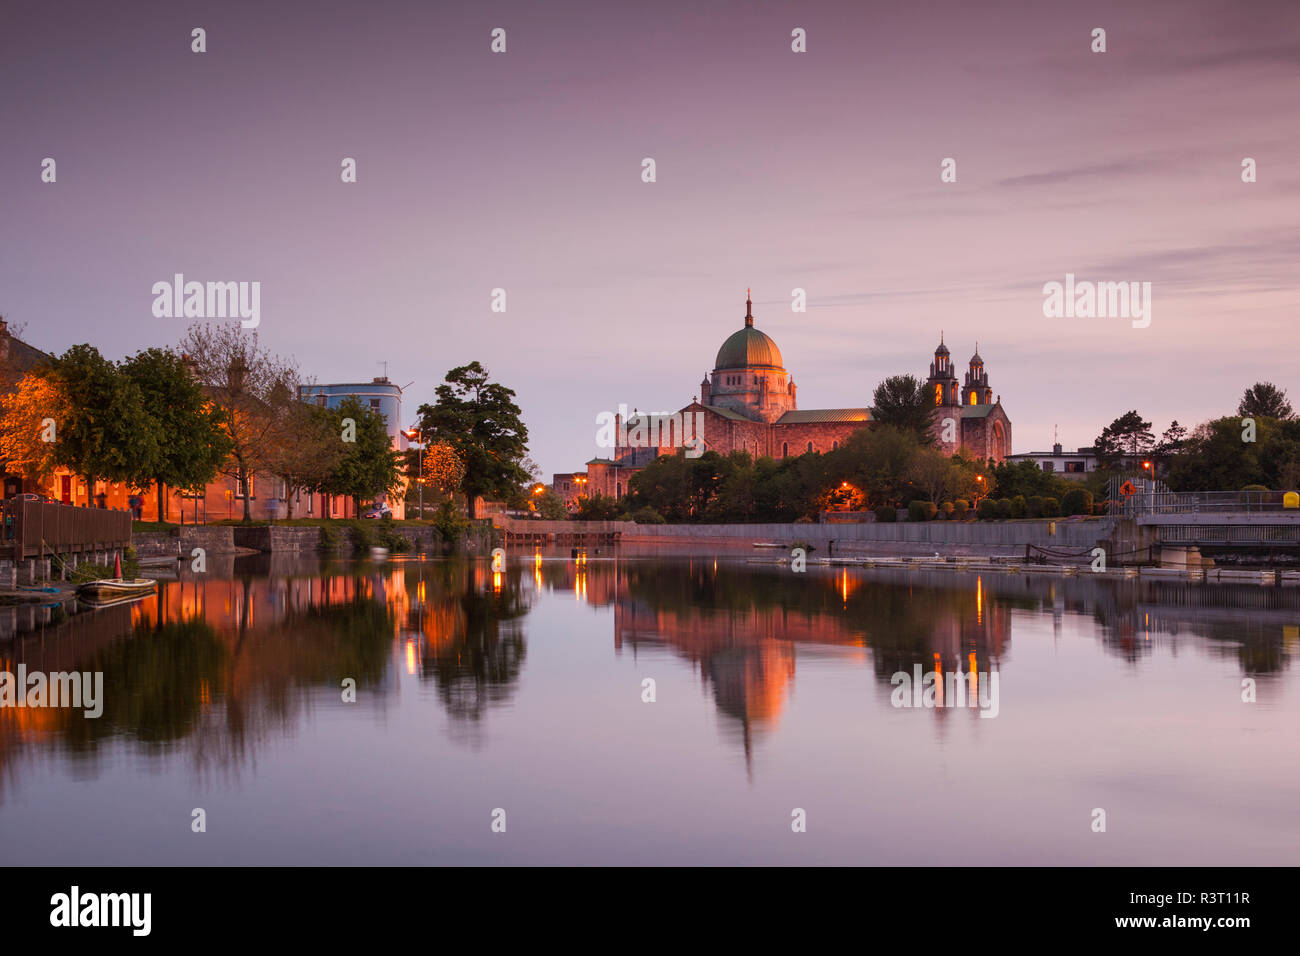 Ireland, County Galway, Galway City, Galway Cathedral, exterior, dusk Stock Photo